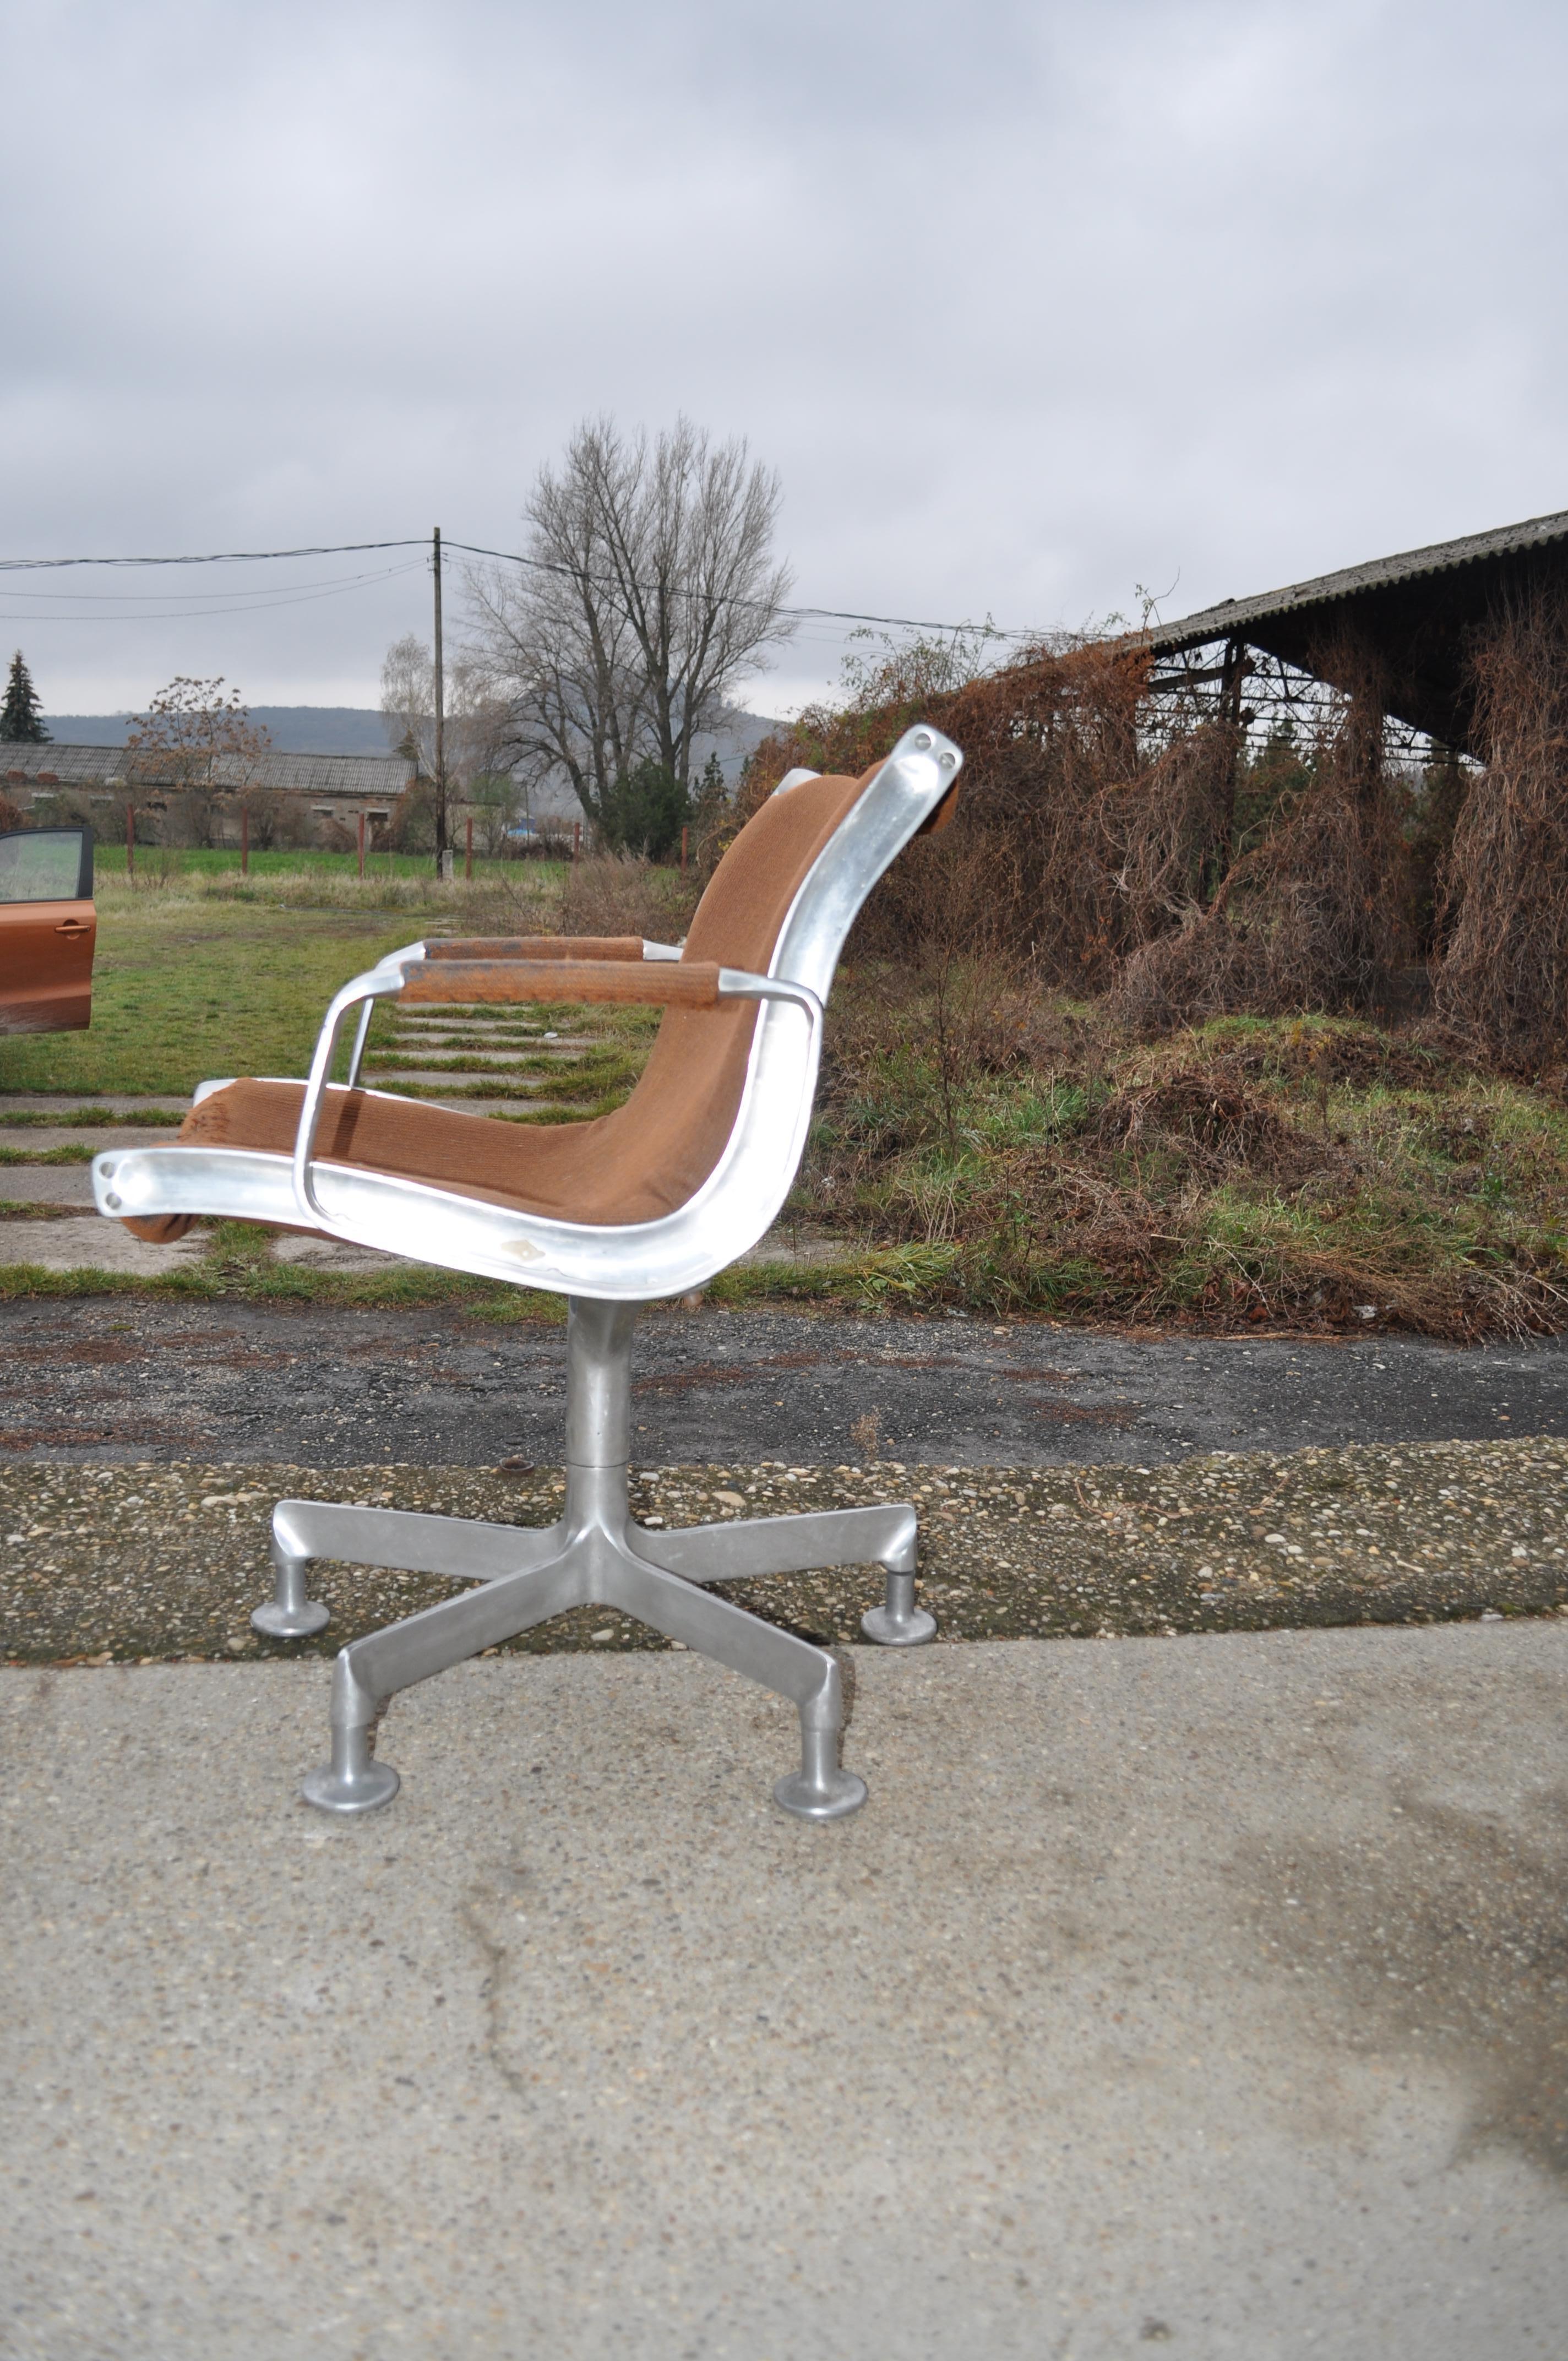 Vintage Rudolf Szedleczky lounge chair, circa 1970 Hungary, Aluminium
Armchair by Szedleczky design, Hungary, 1970s
Original form design piece from Hungary
We recommend the upholstery.
Rudolf Szedleczky lounge chair
Look at the photos there is